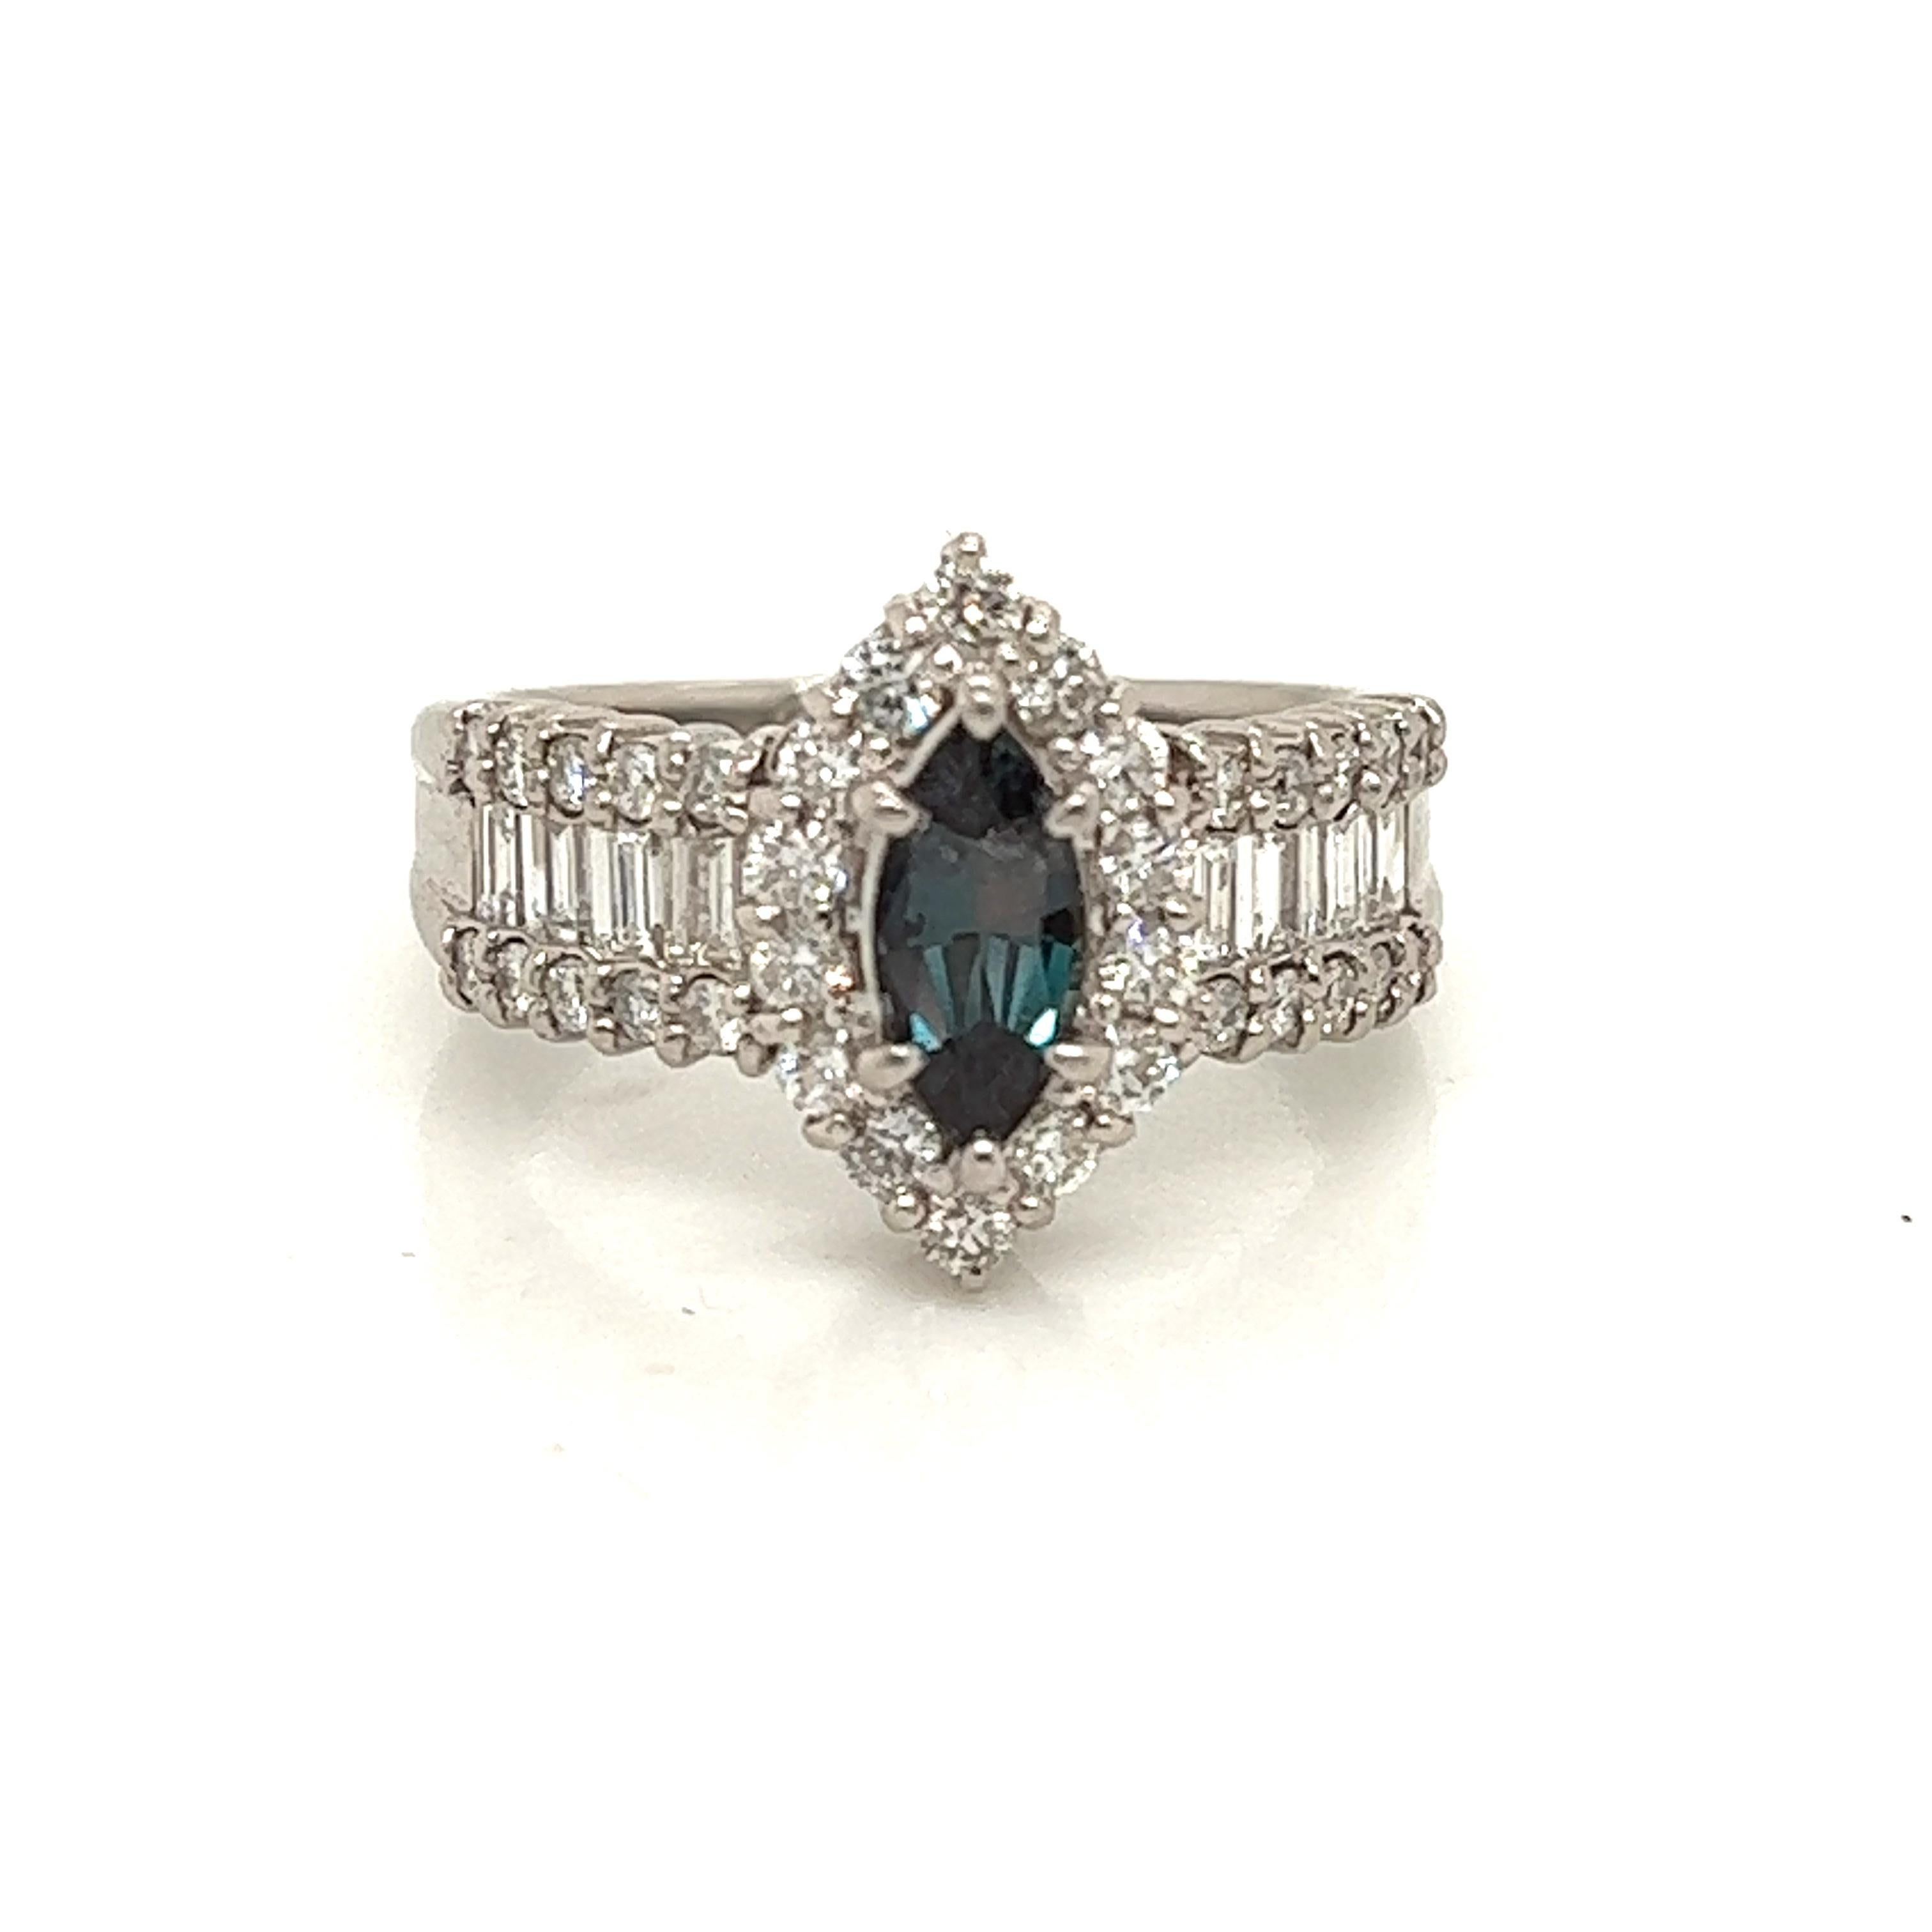 This is a gorgeous natural AAA quality marquise Alexandrite surrounded by dainty diamonds that is set in a vintage platinum setting. This ring features a natural 0.72 carat  marquise alexandrite that is certified by the Gemological Institute of